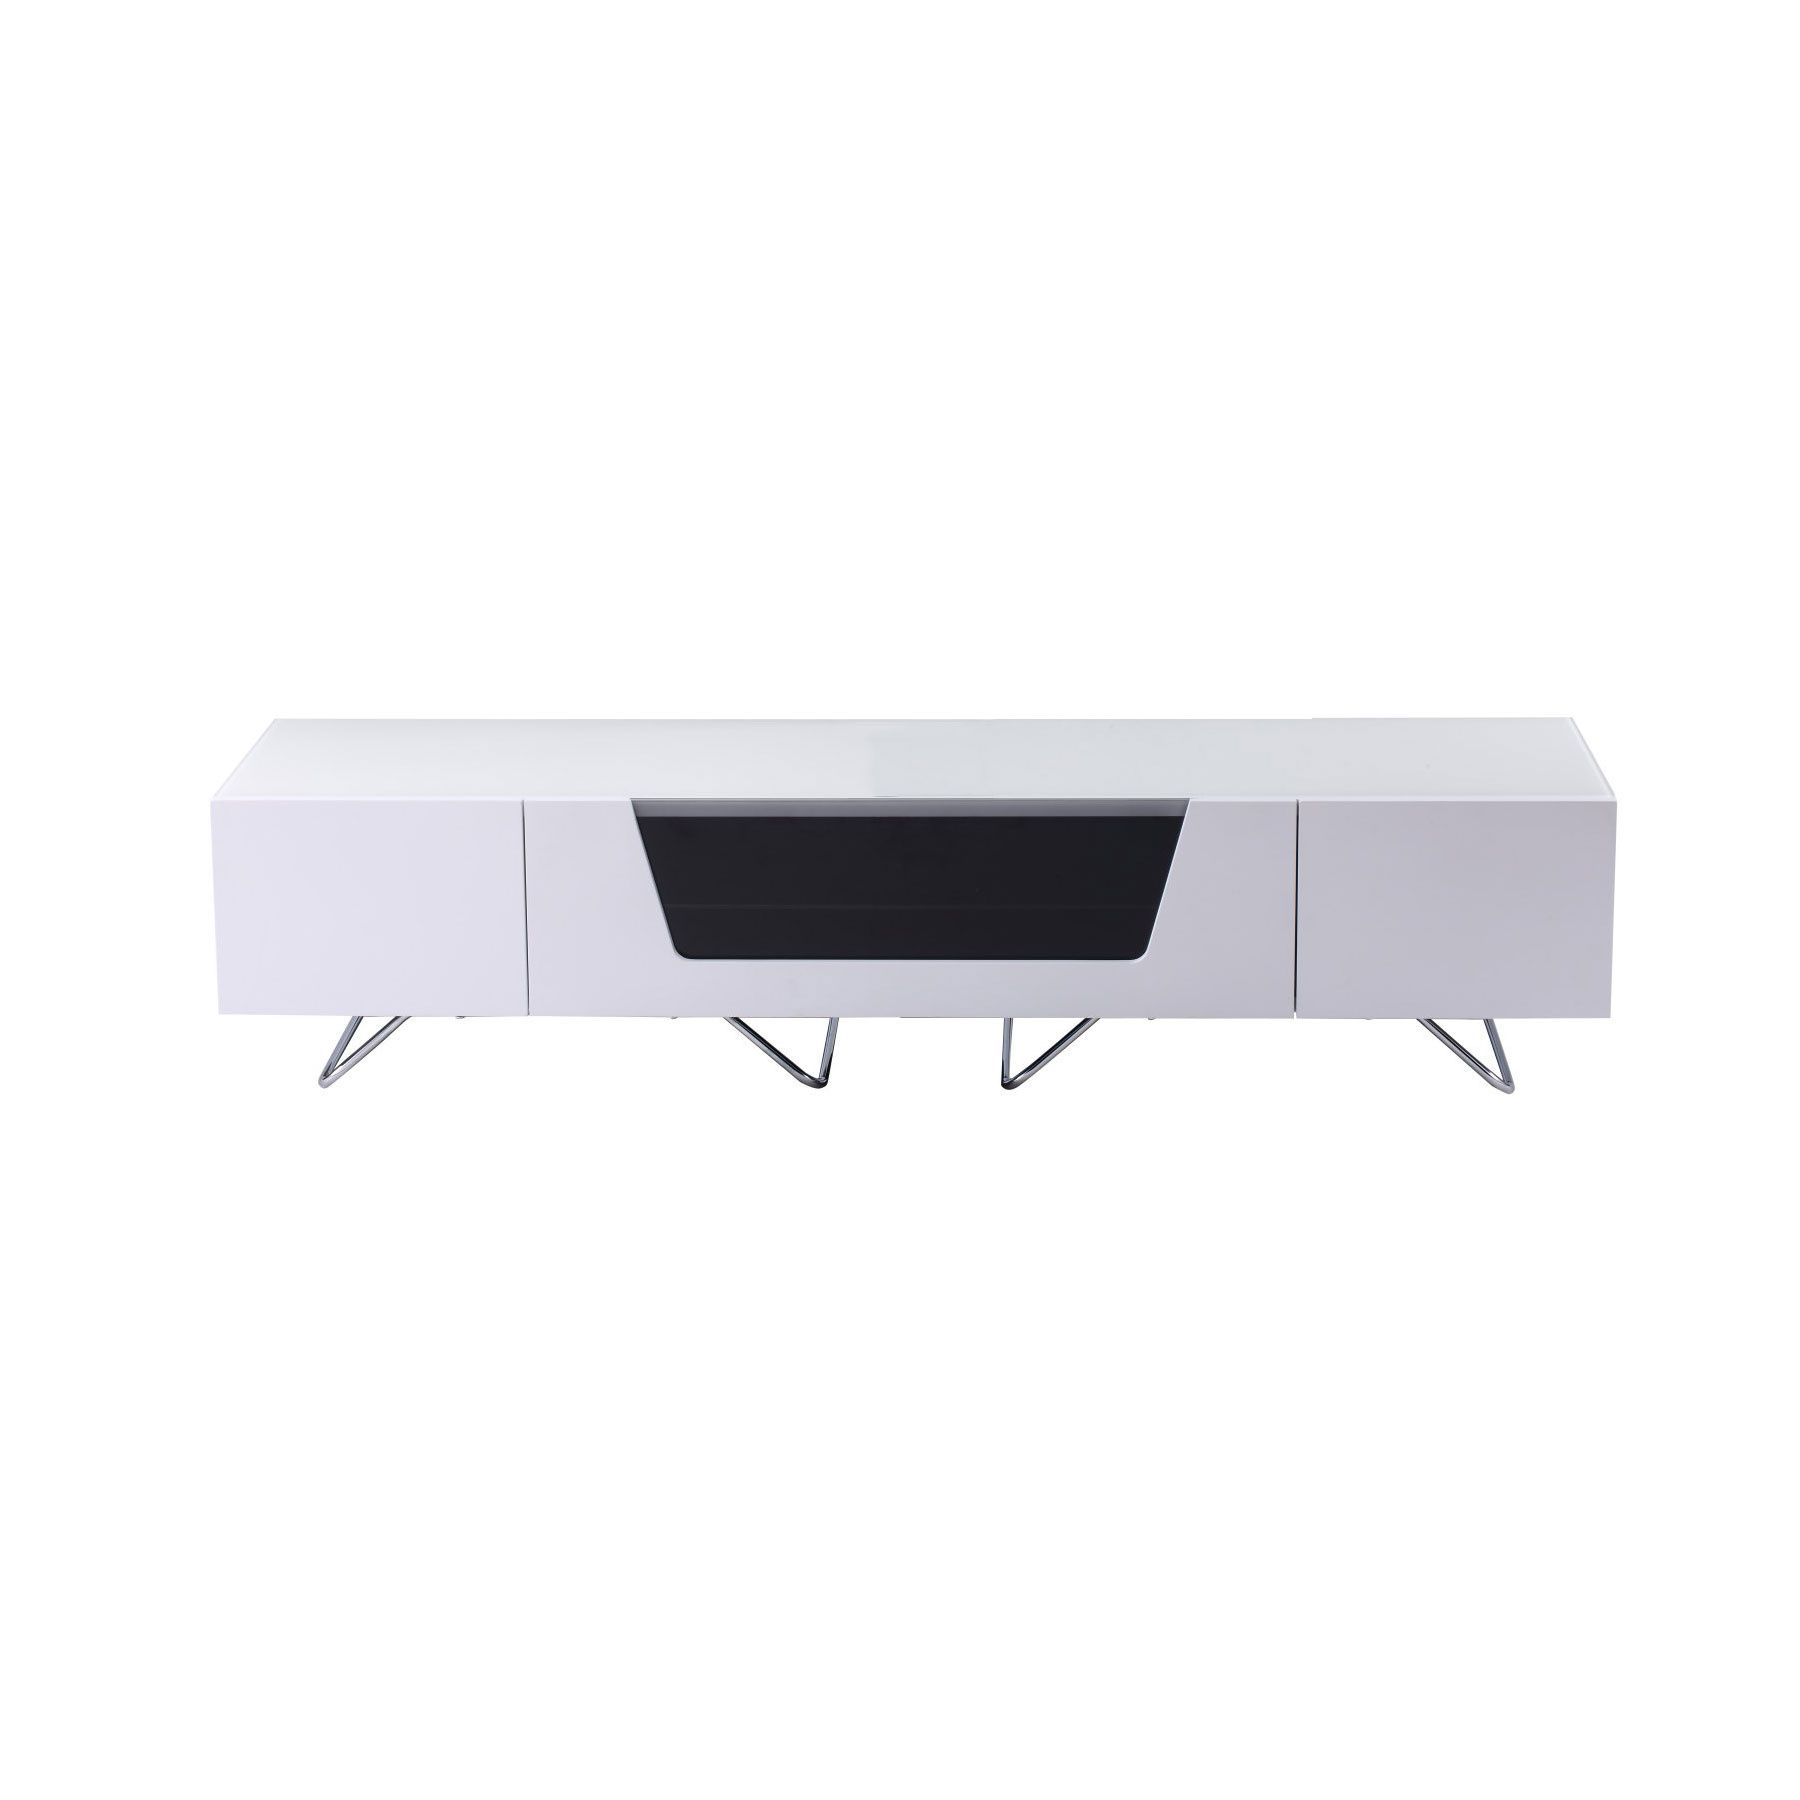 Alphason Chromium 2 160cm White Tv Stand For Up To 75" Tvs Pertaining To Chromium Tv Stands (View 7 of 15)